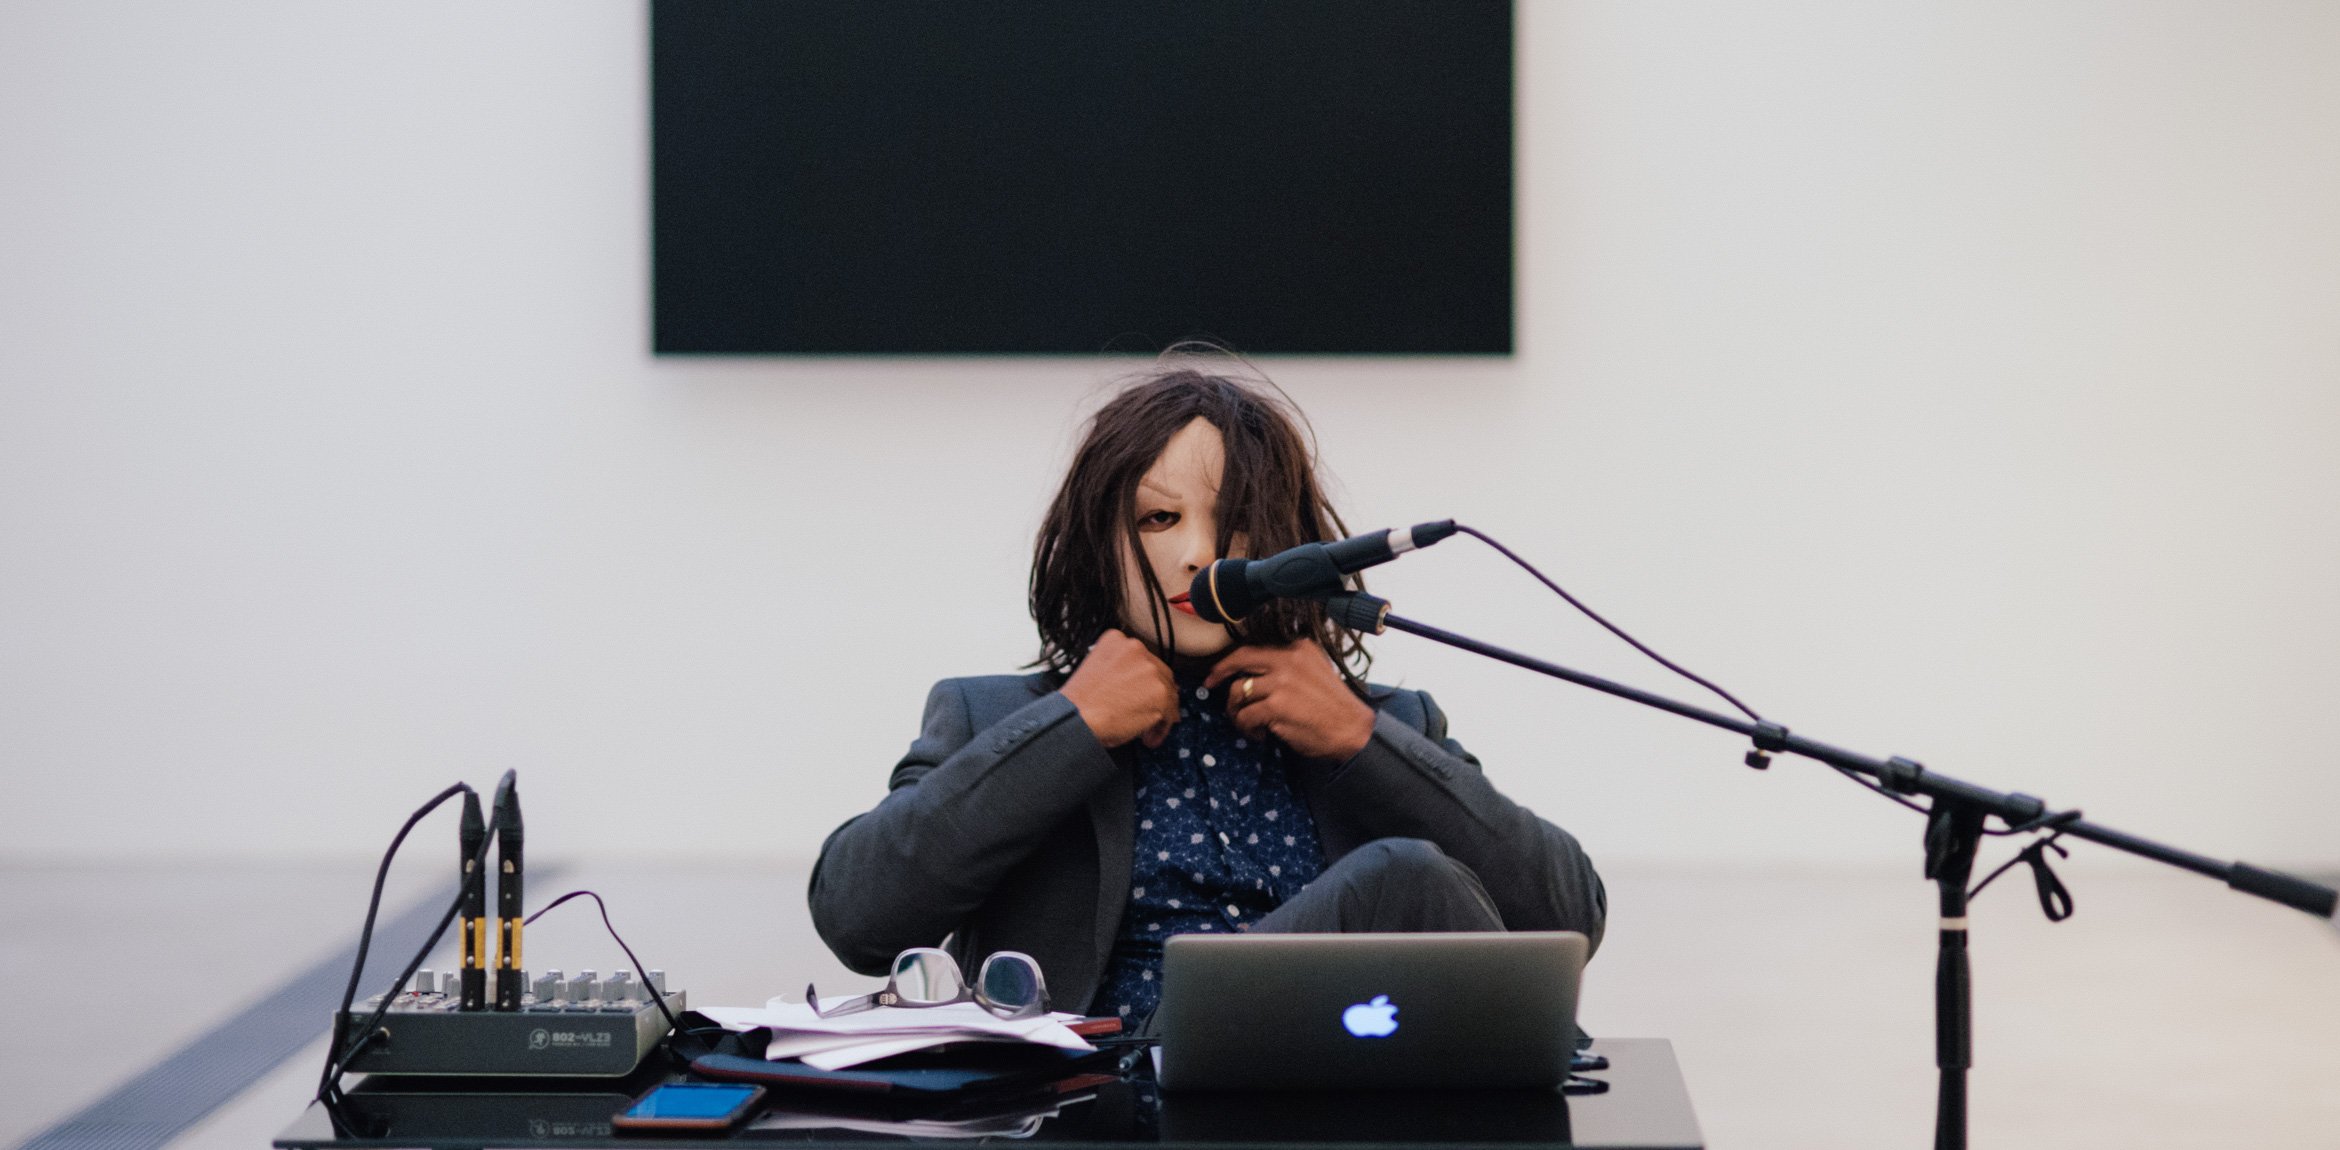 Ronaldo Wilson sits in a mask behind a desk with a microphone and laptop, in front of Ellsworth Kelly's "Blue Black."